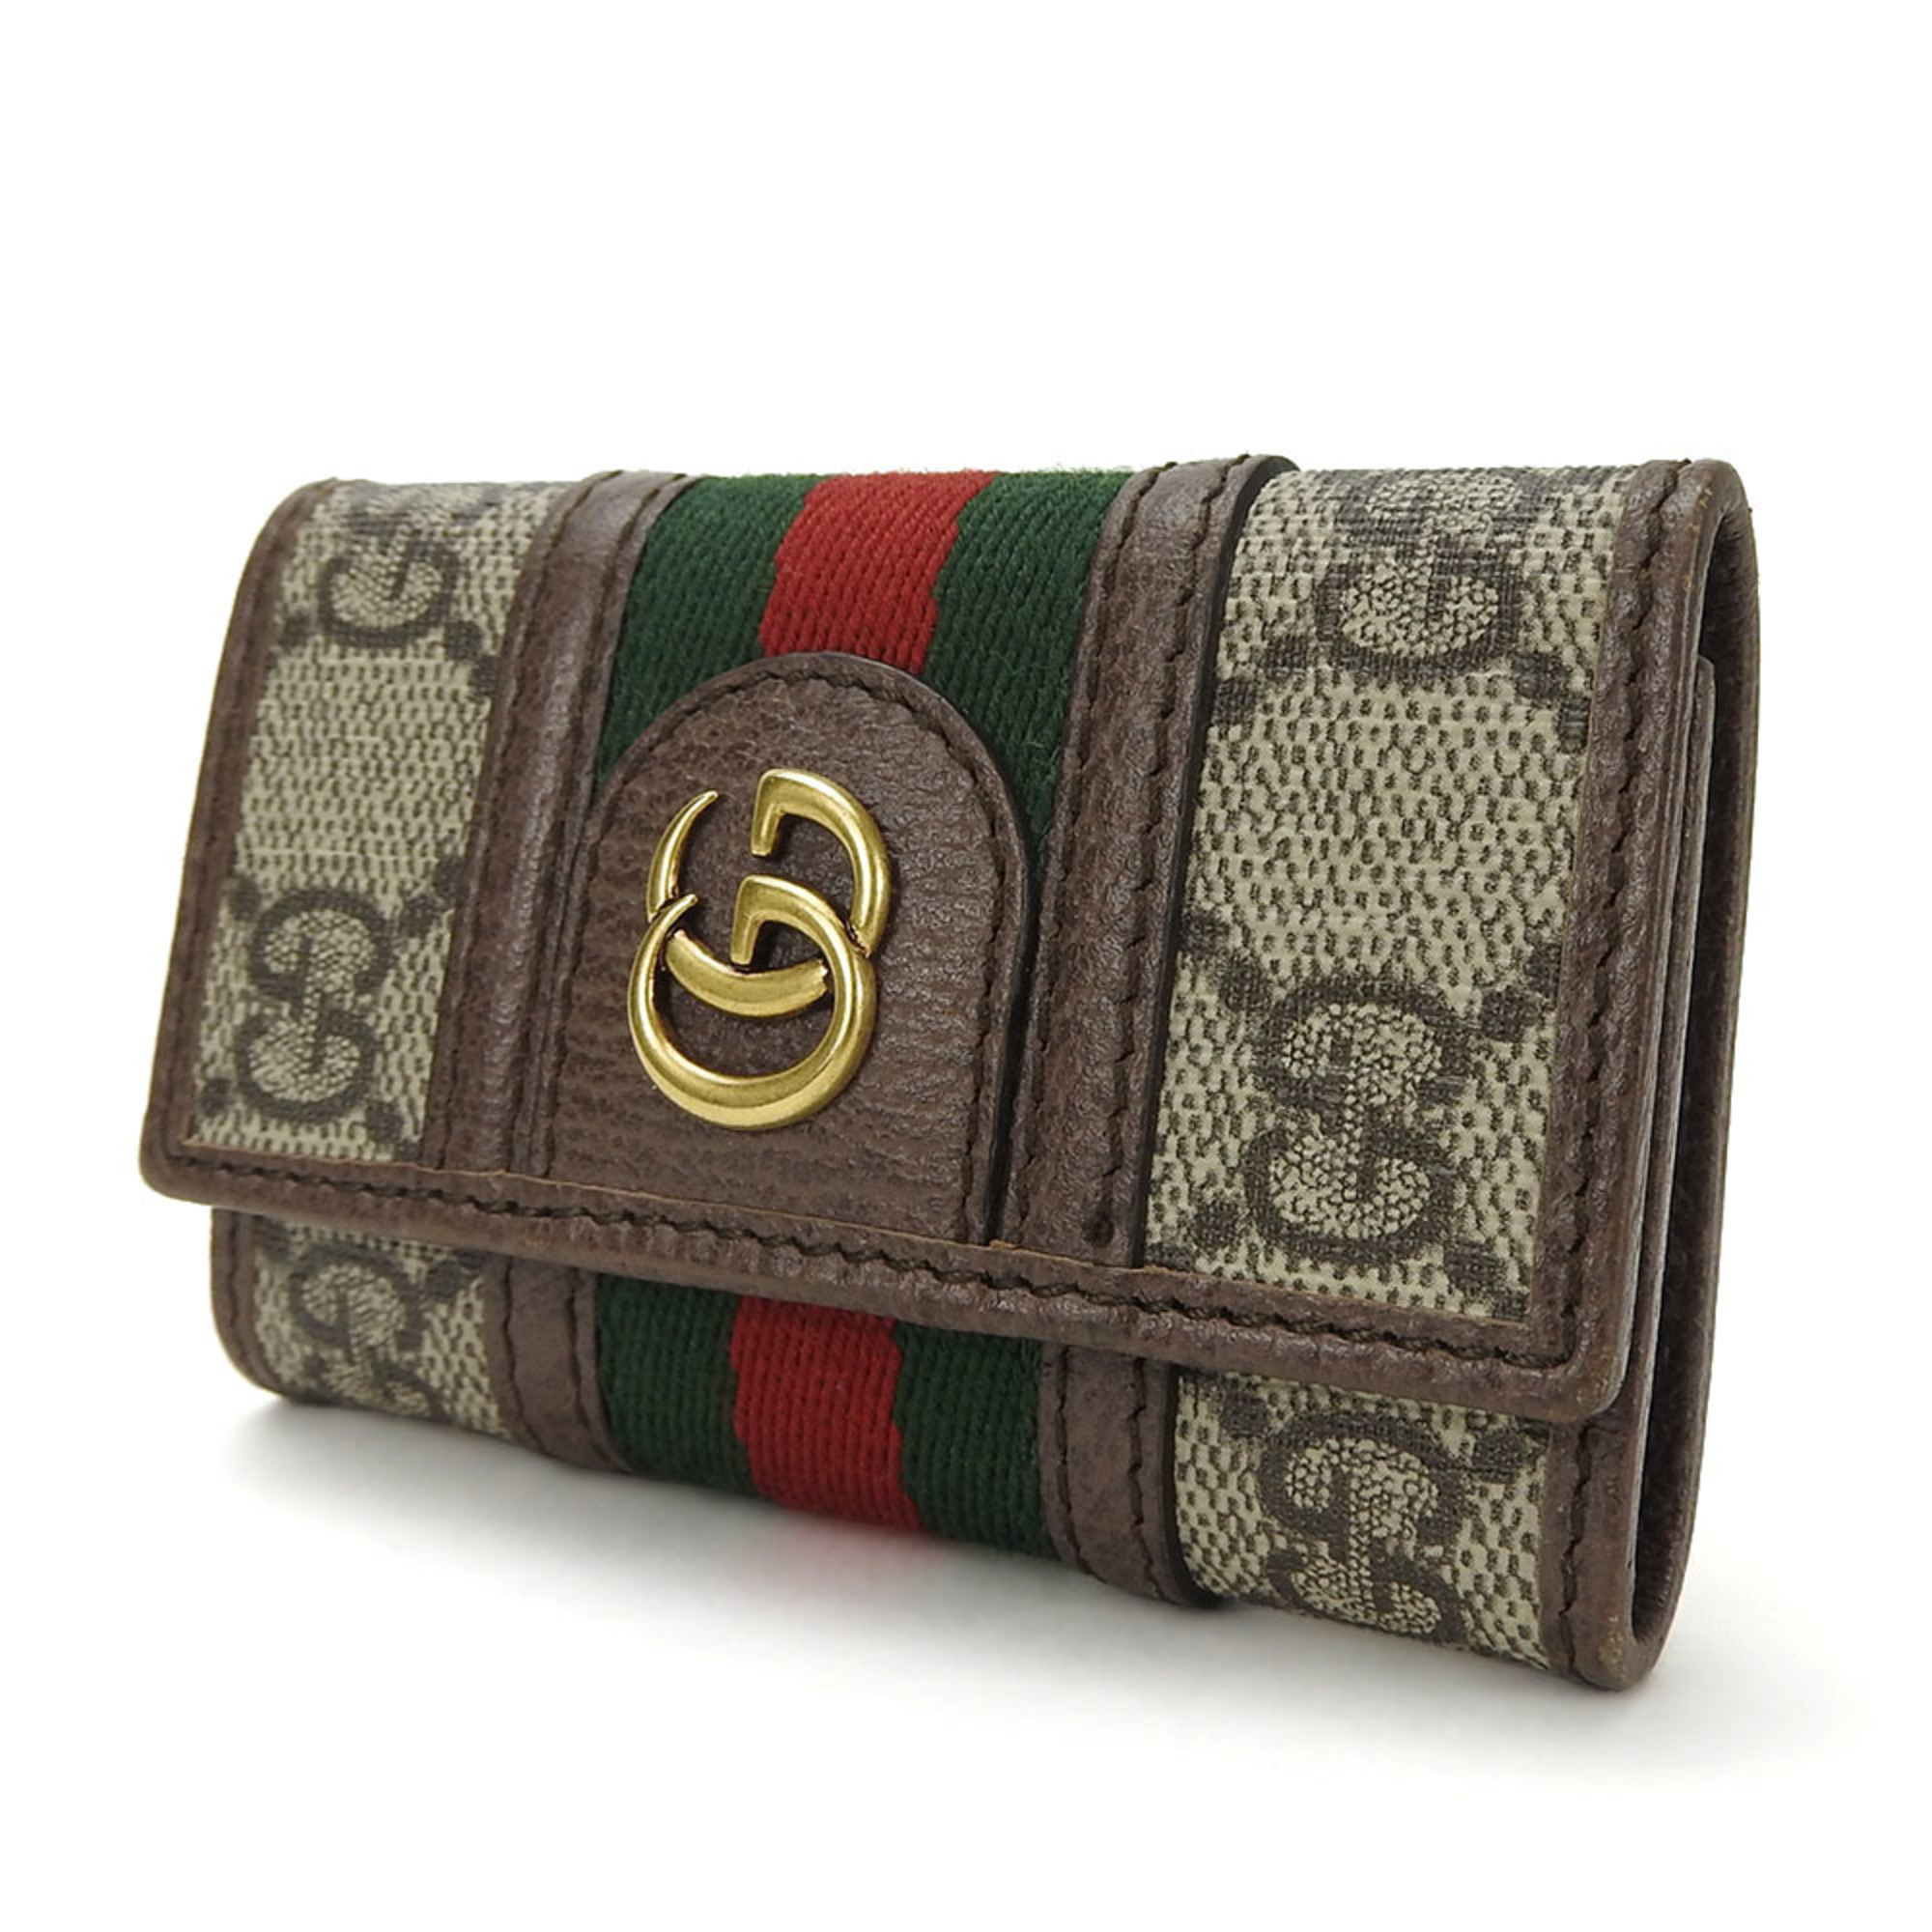 GUCCI Key Case 6 Rows 603732 GG Supreme Offdia Sherry Beige Brown Leather Accessories Women's Gold